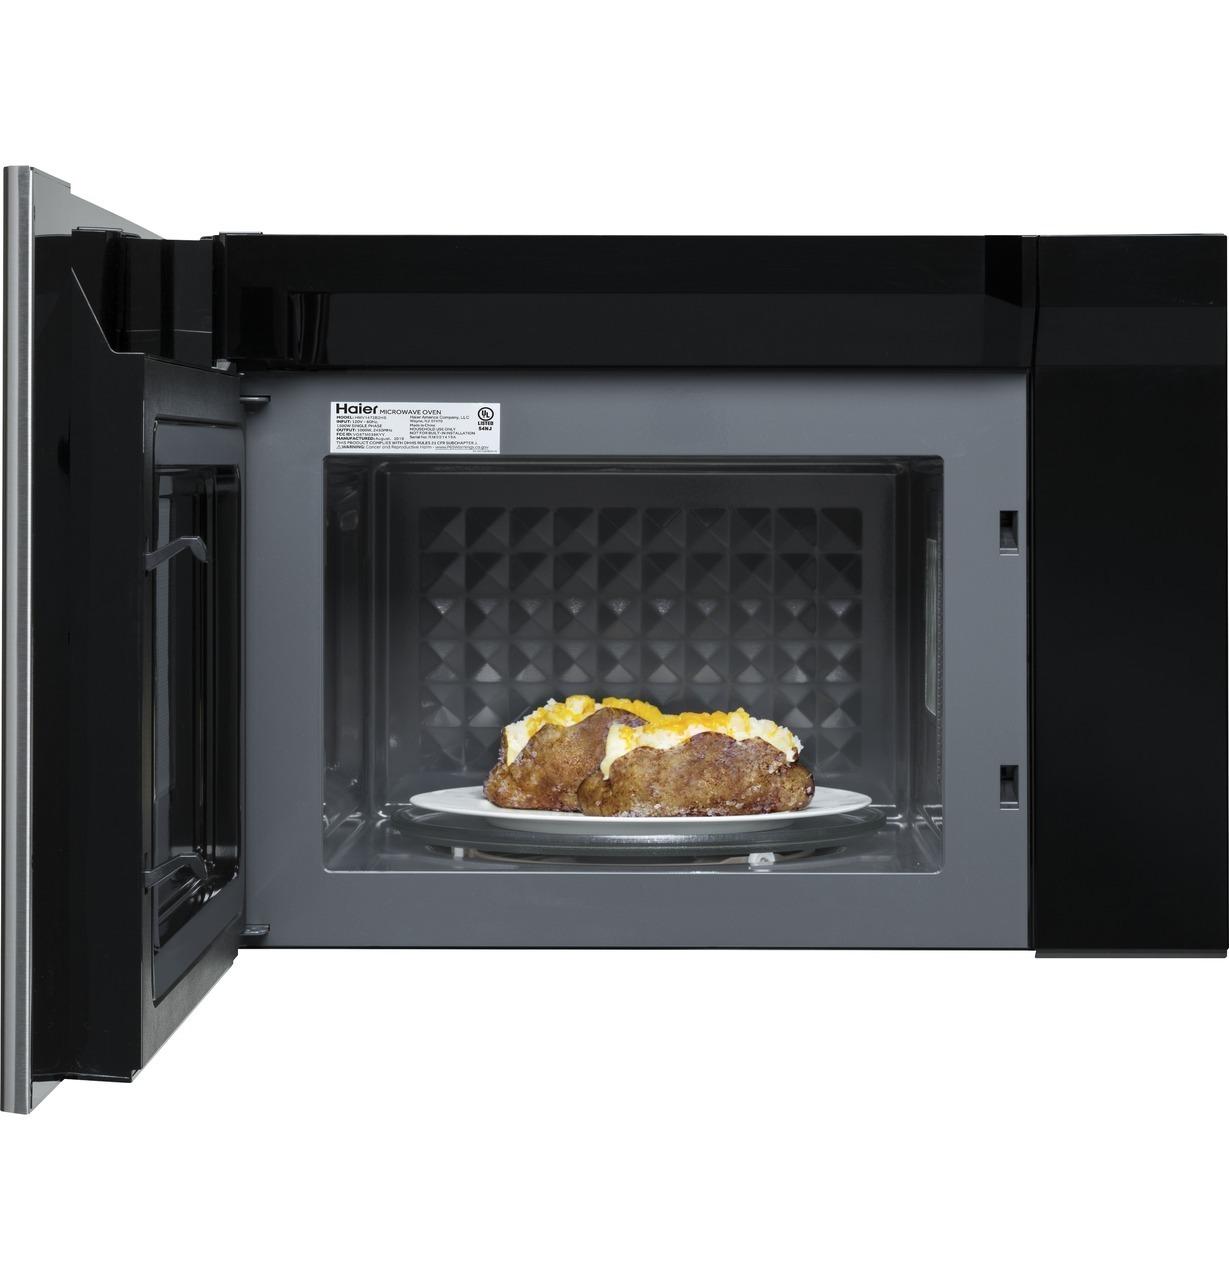 Haier 24" 1.4 Cu. Ft. Over-The-Range Microwave Oven